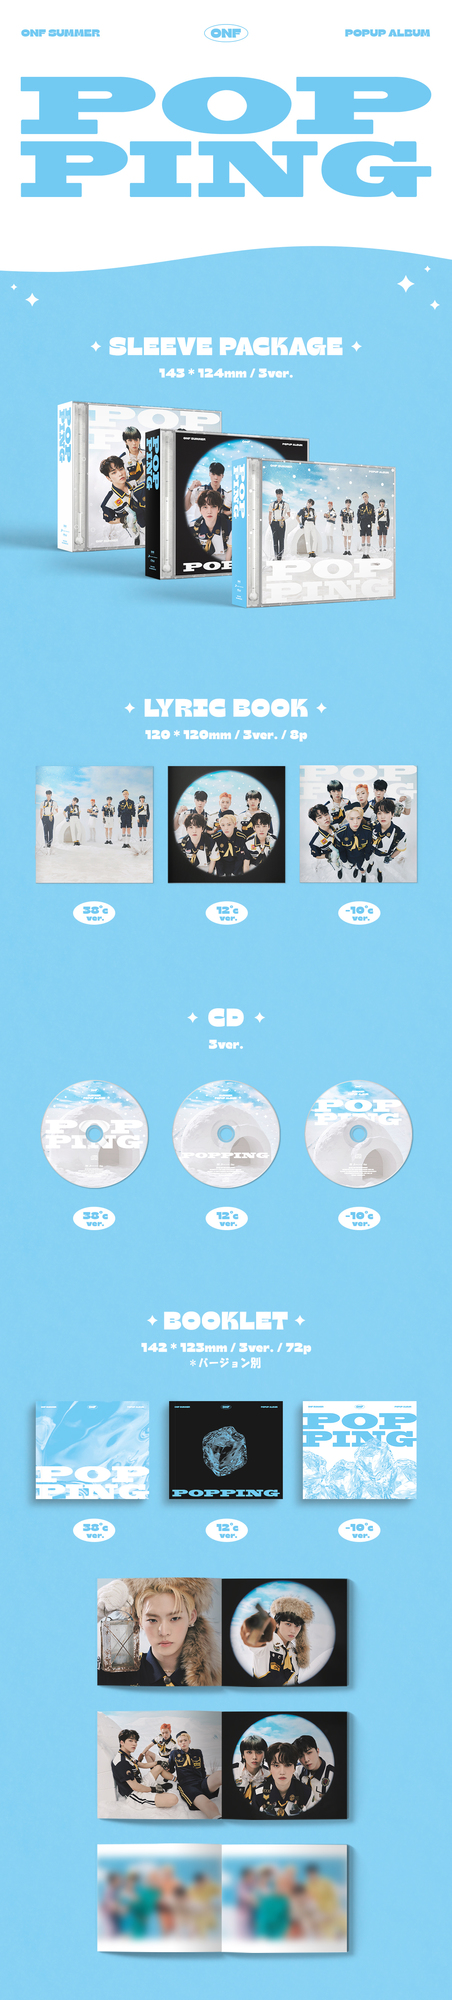 ONF SUMMER POPUP ALBUM「POPPING」FC限定販売決定！（追記） | ONF ...